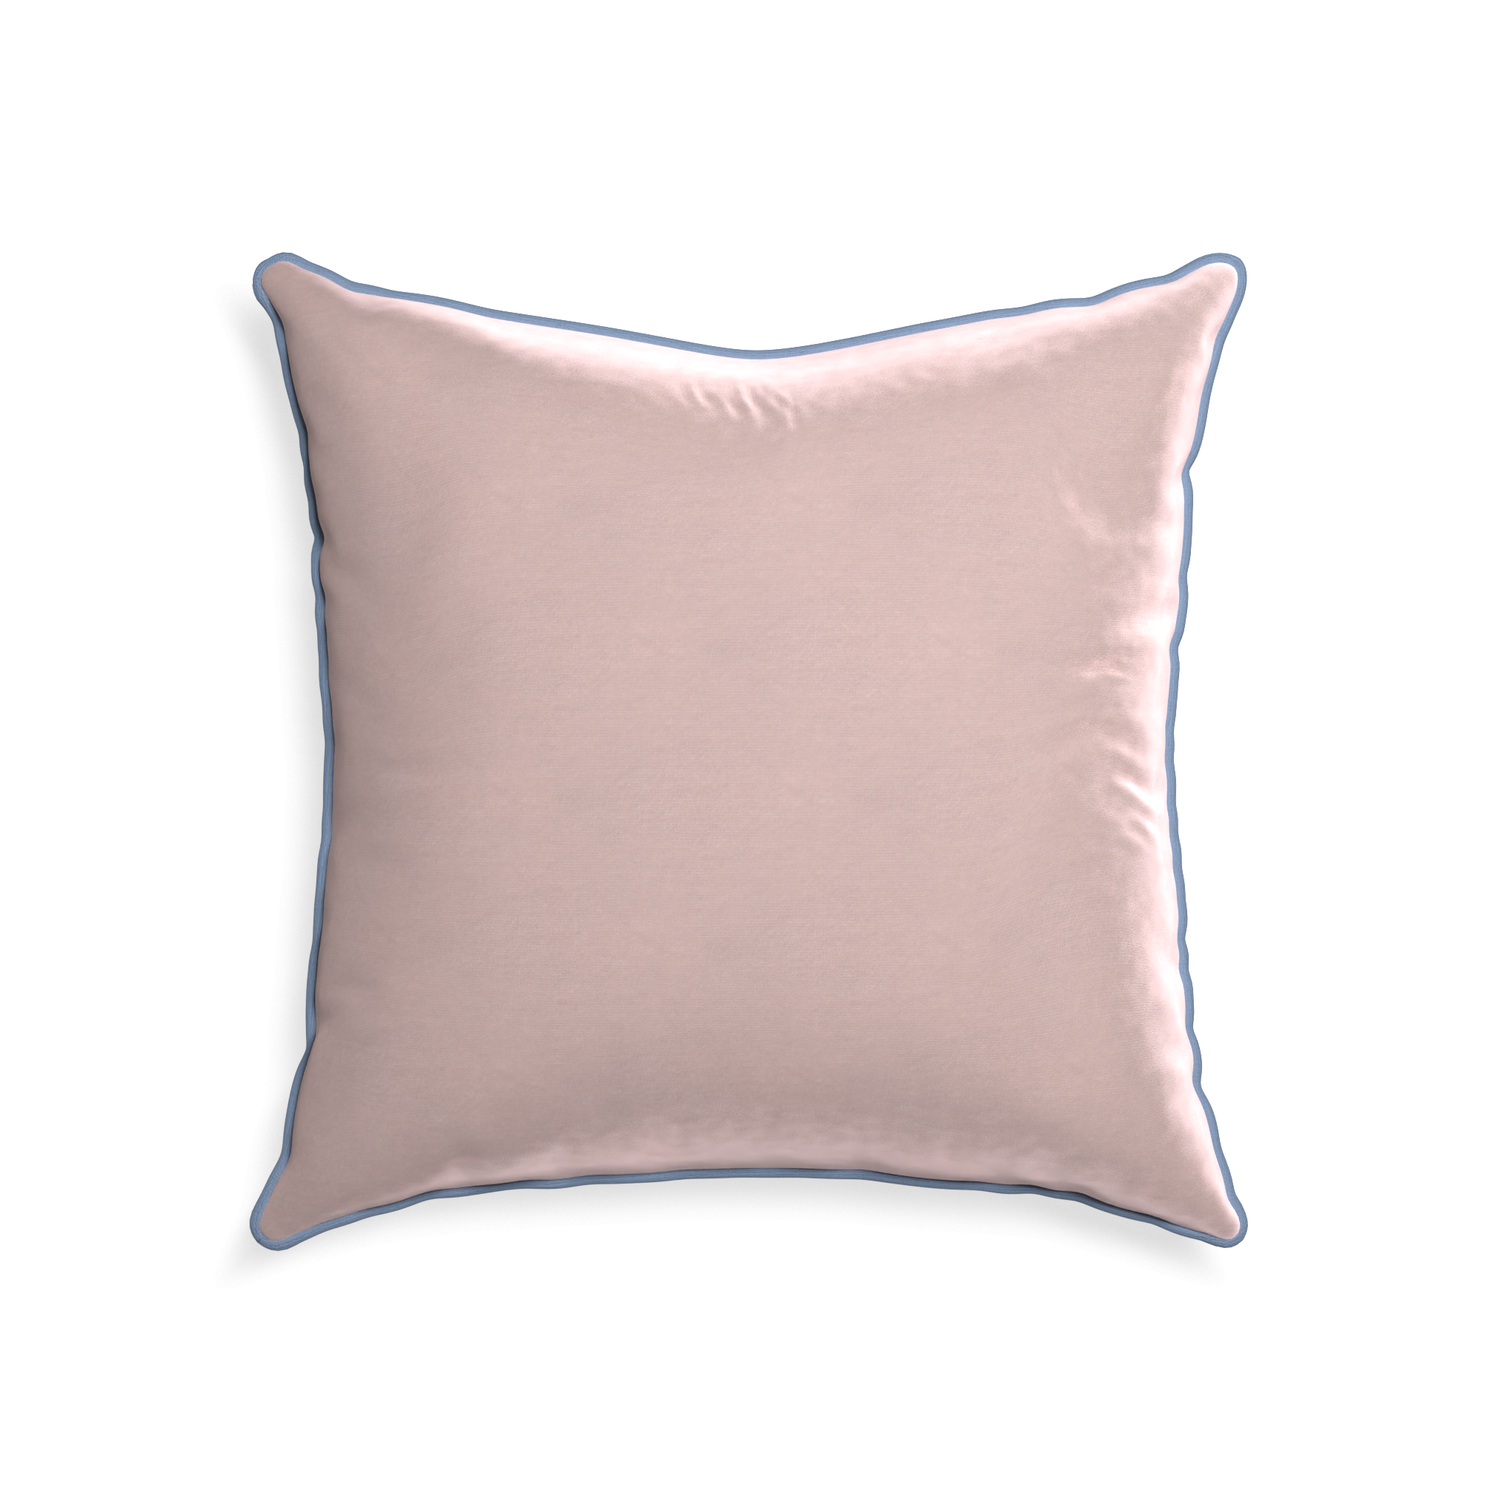 square light pink velvet pillow with sky blue piping